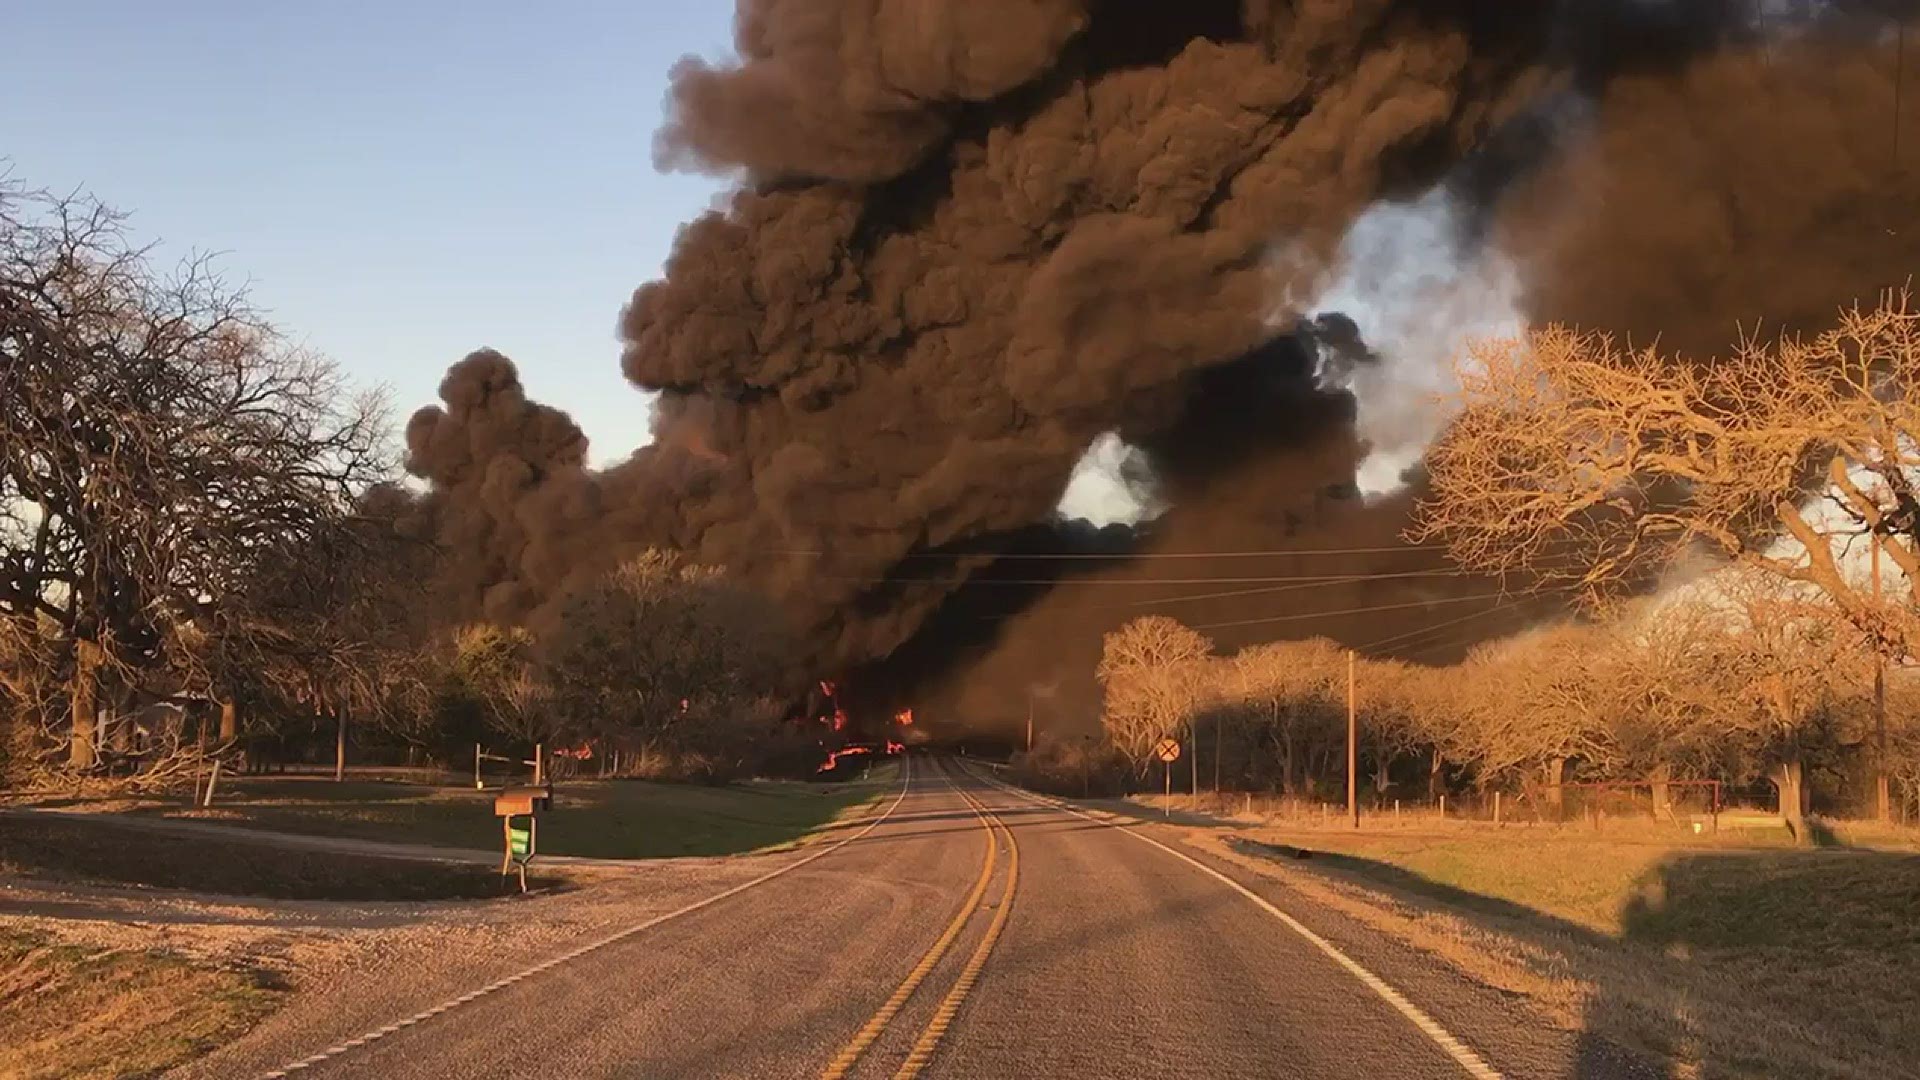 Sheriff Chris White said the train was carrying coal and gasoline in its front compartments, which resulted in the huge explosion.